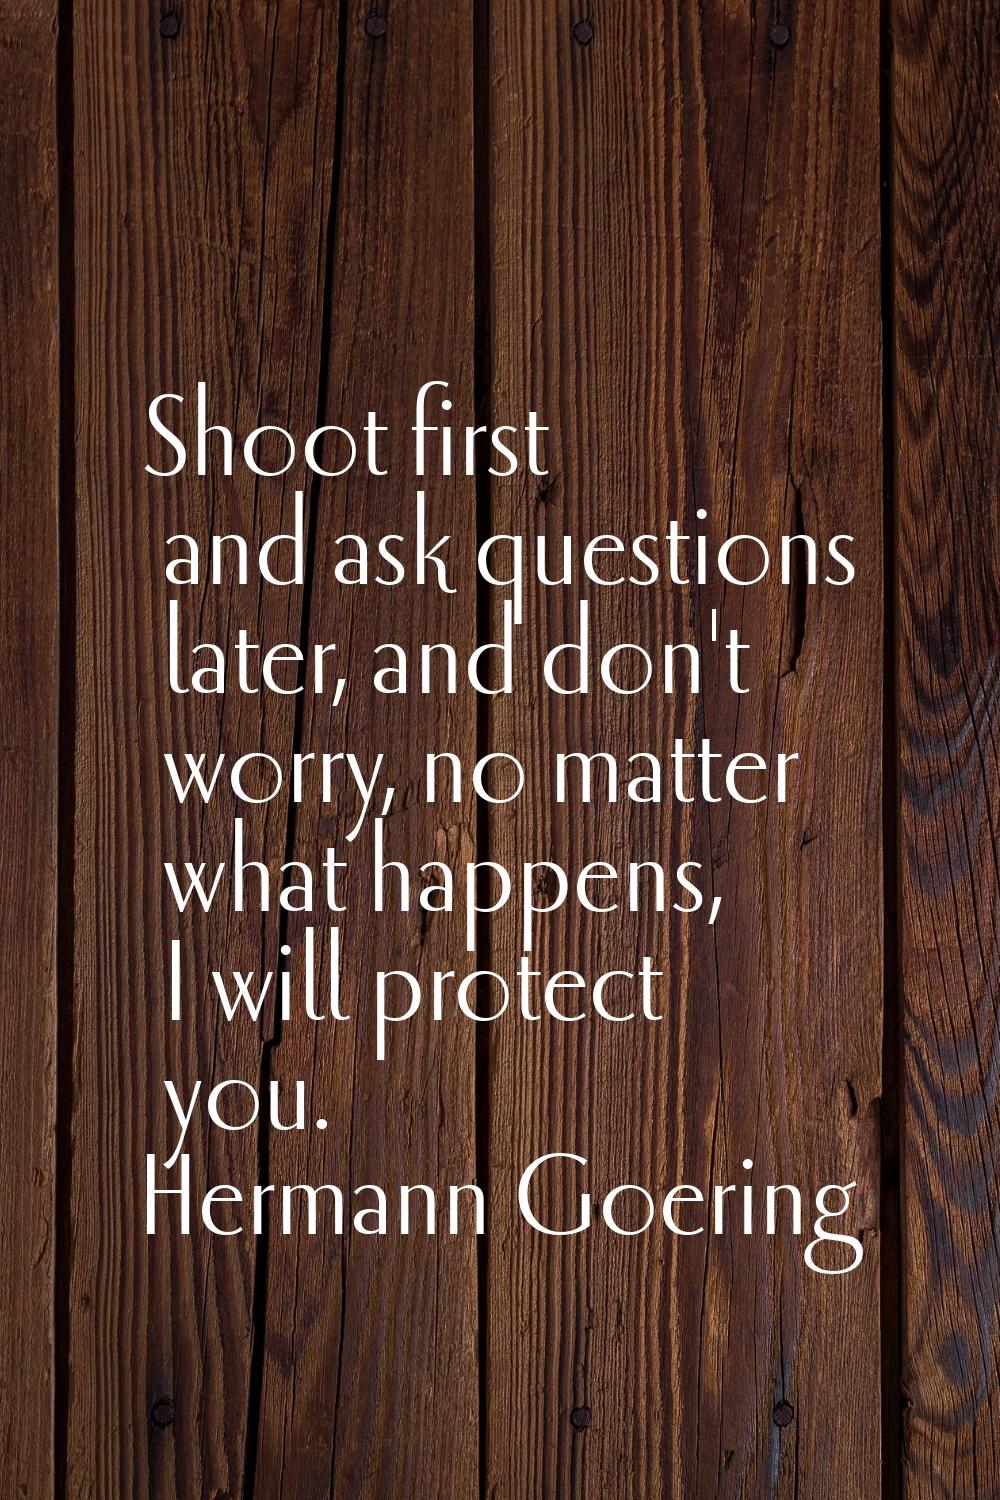 Shoot first and ask questions later, and don't worry, no matter what happens, I will protect you.